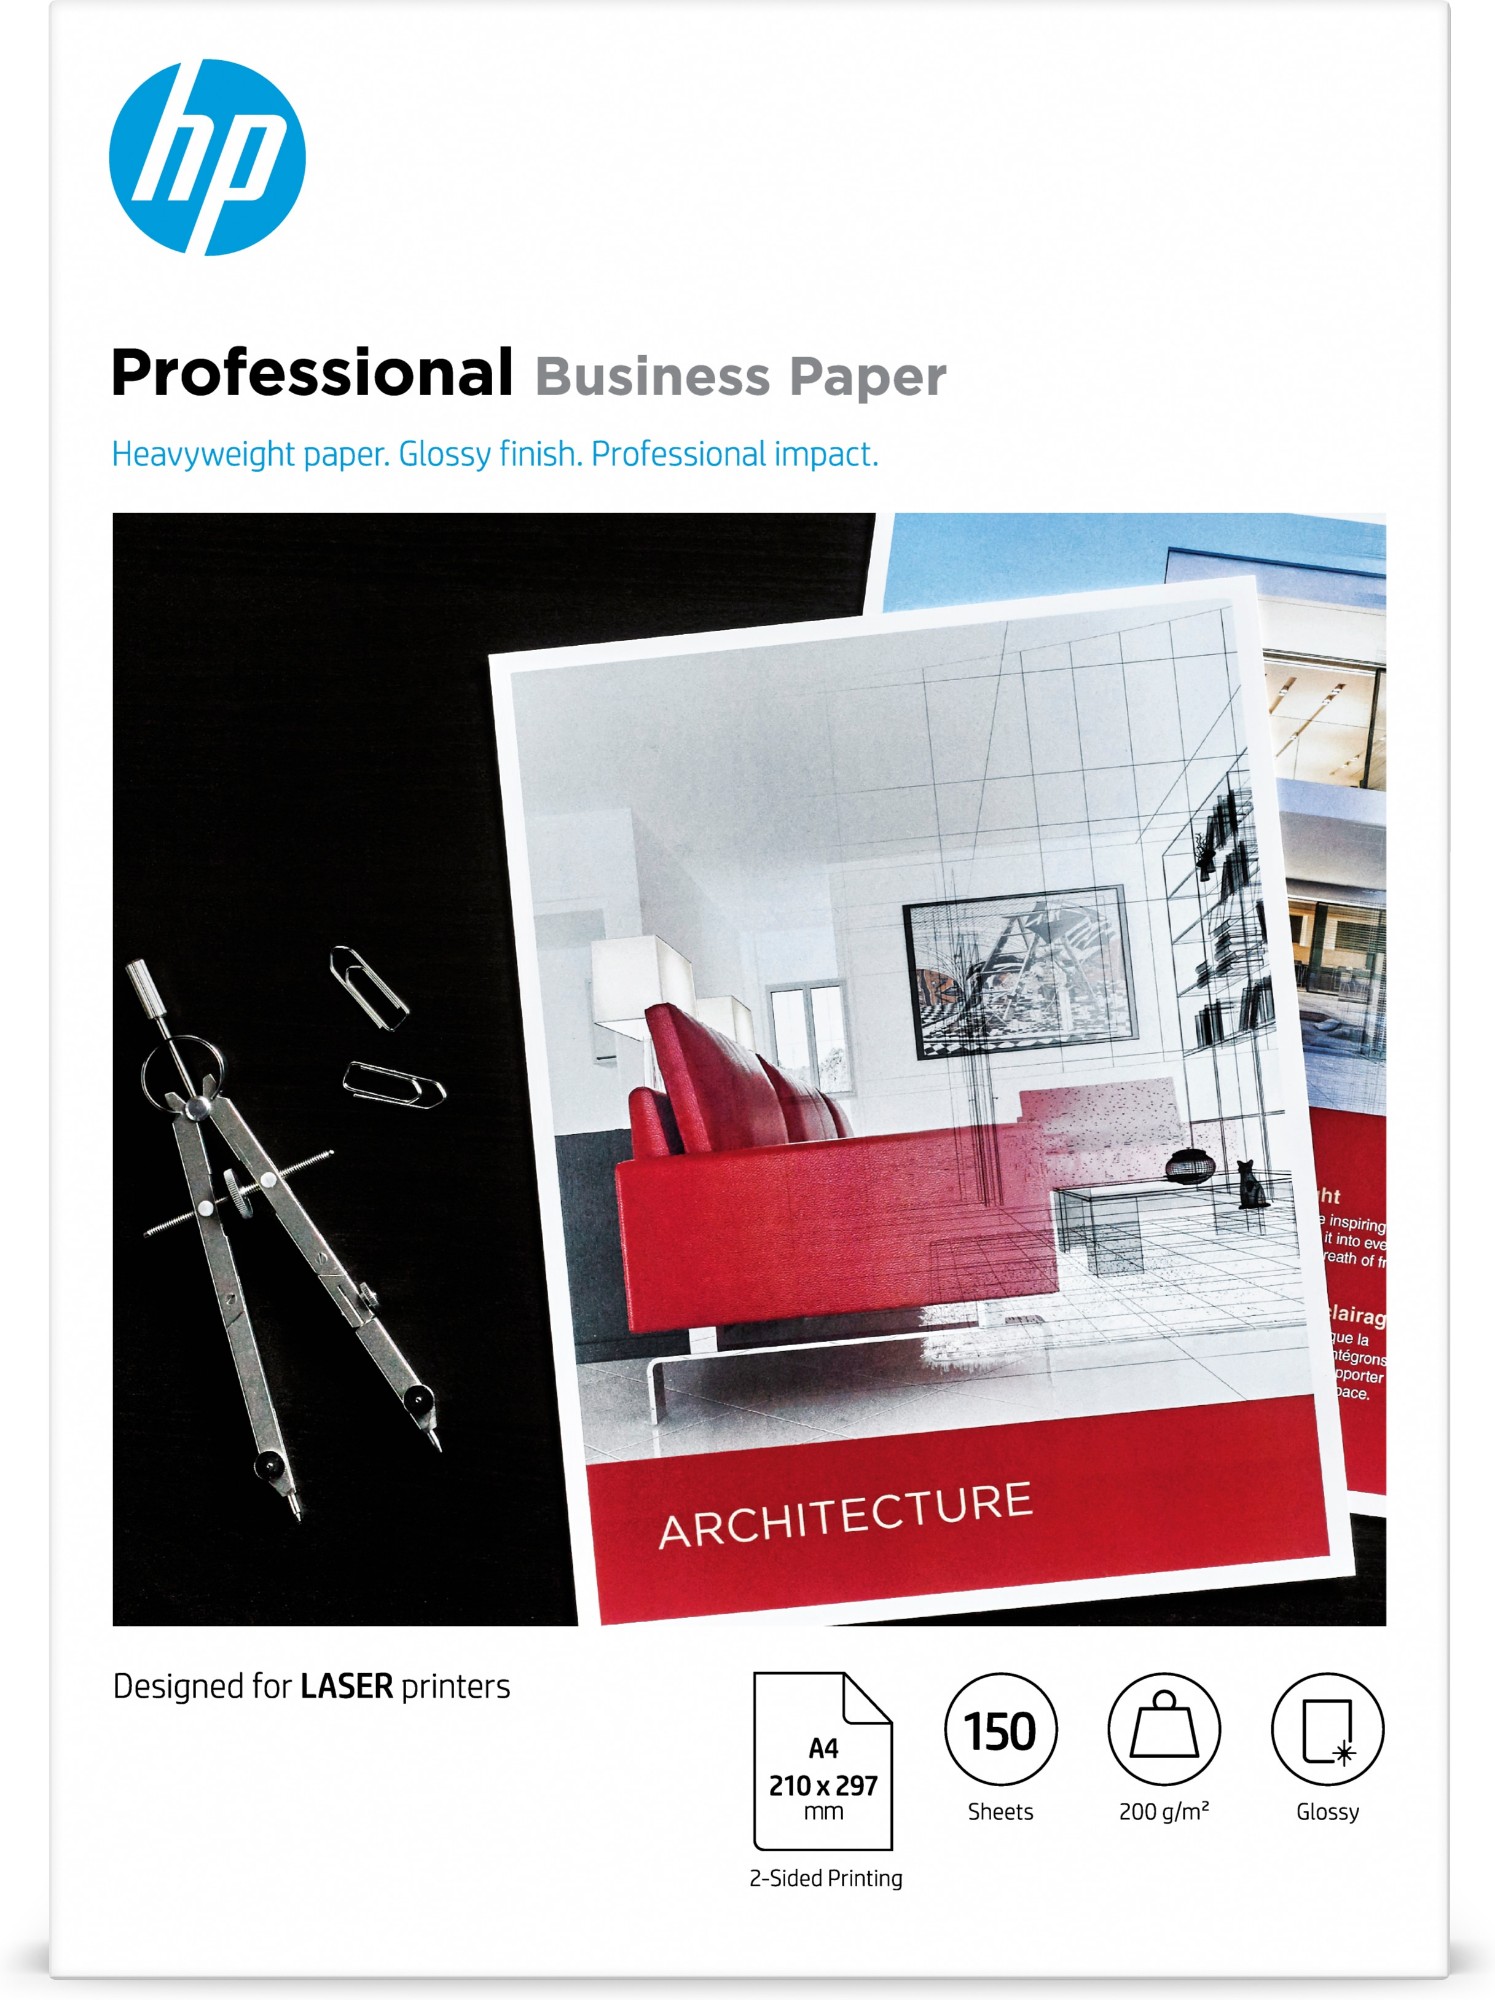 HP Laser Professional Business Paper A4, Glossy, 200gsm - 7MV83A